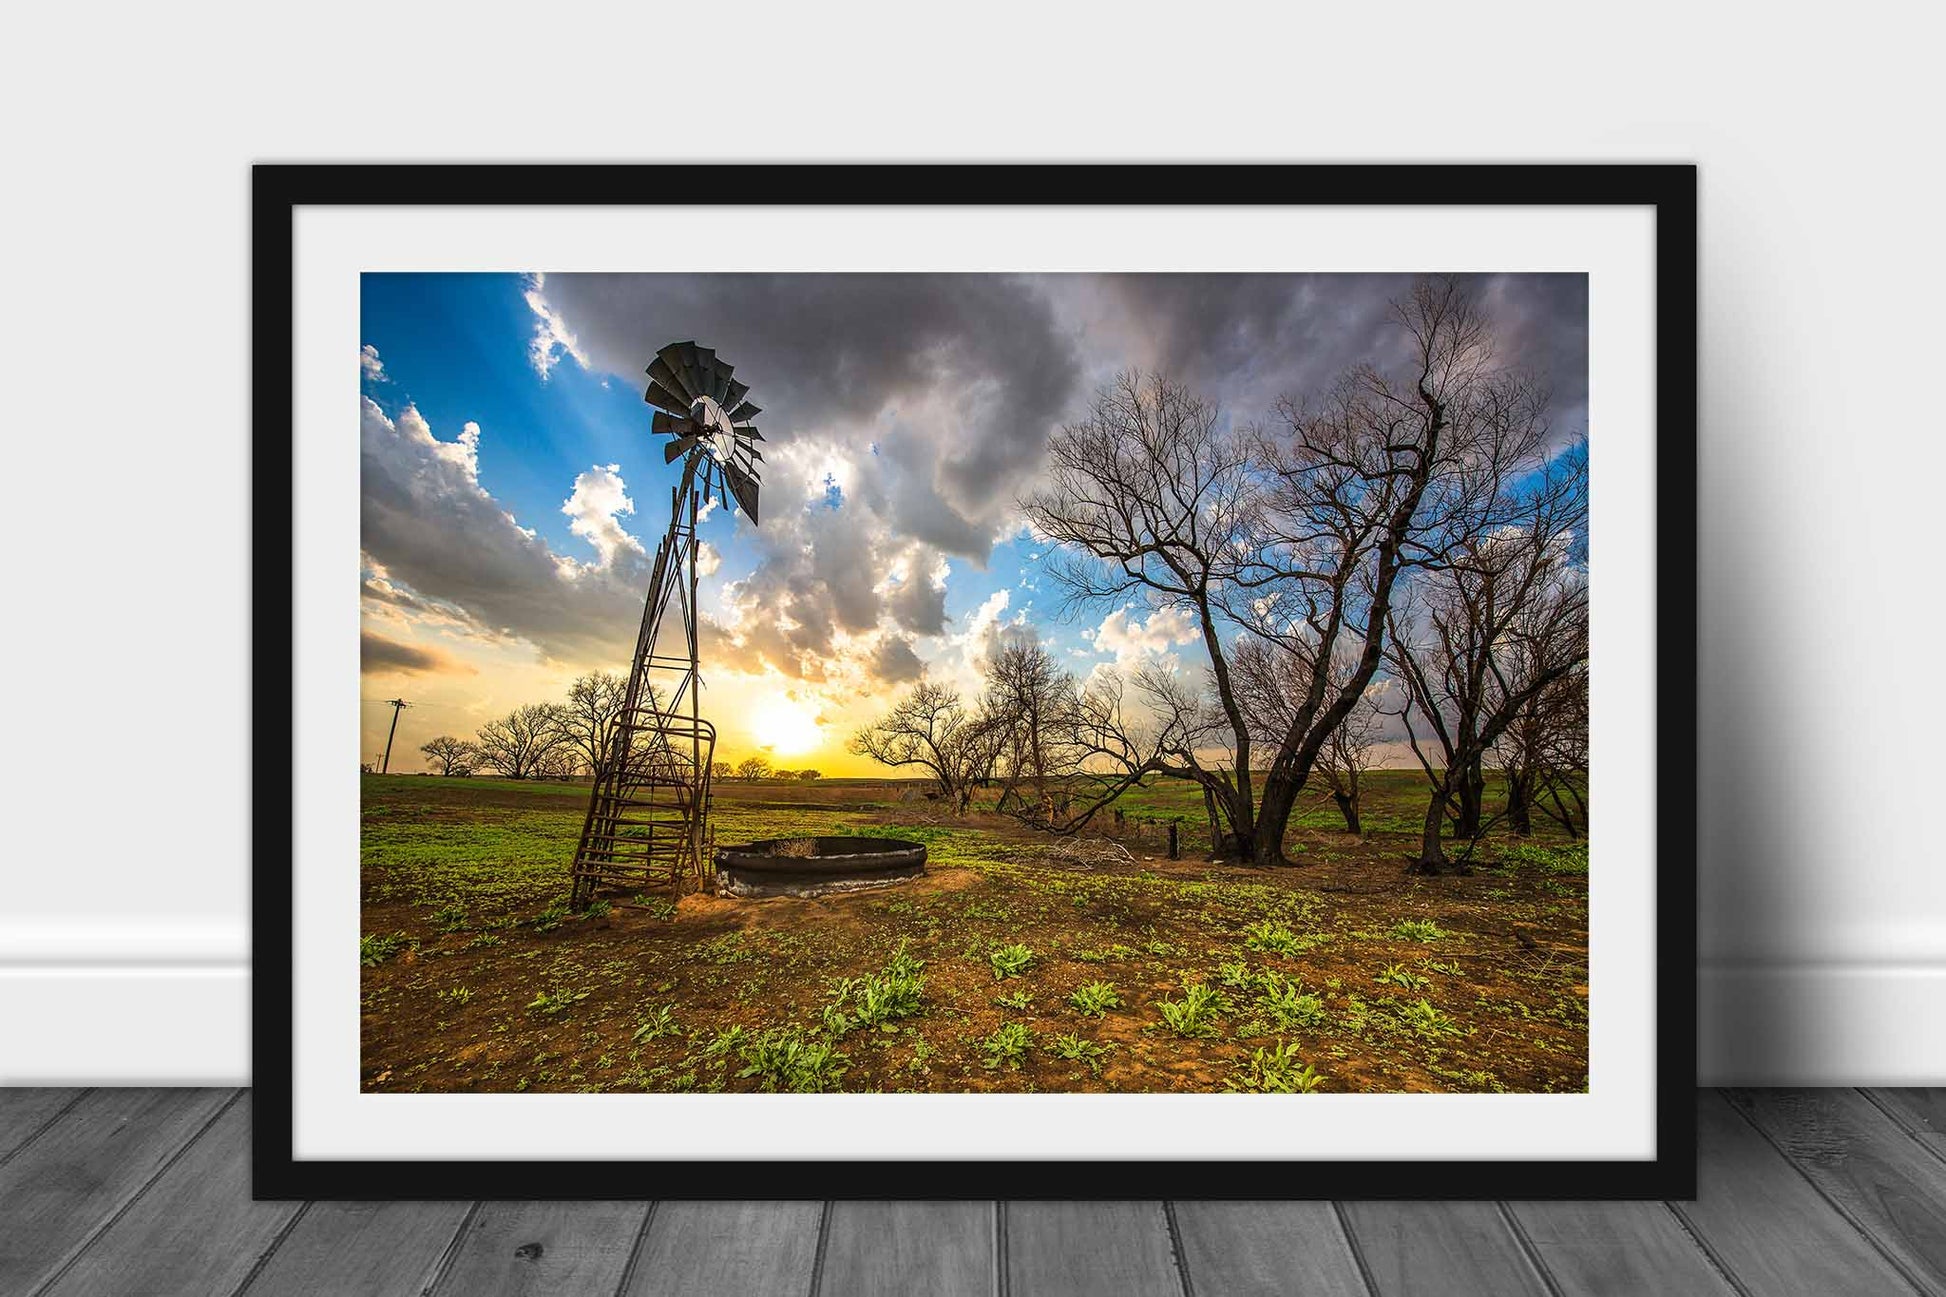 Framed and matted country photography print of an old windmill and charred trees at sunset on a spring evening on the plains of Kansas by Sean Ramsey of Southern Plains Photography.